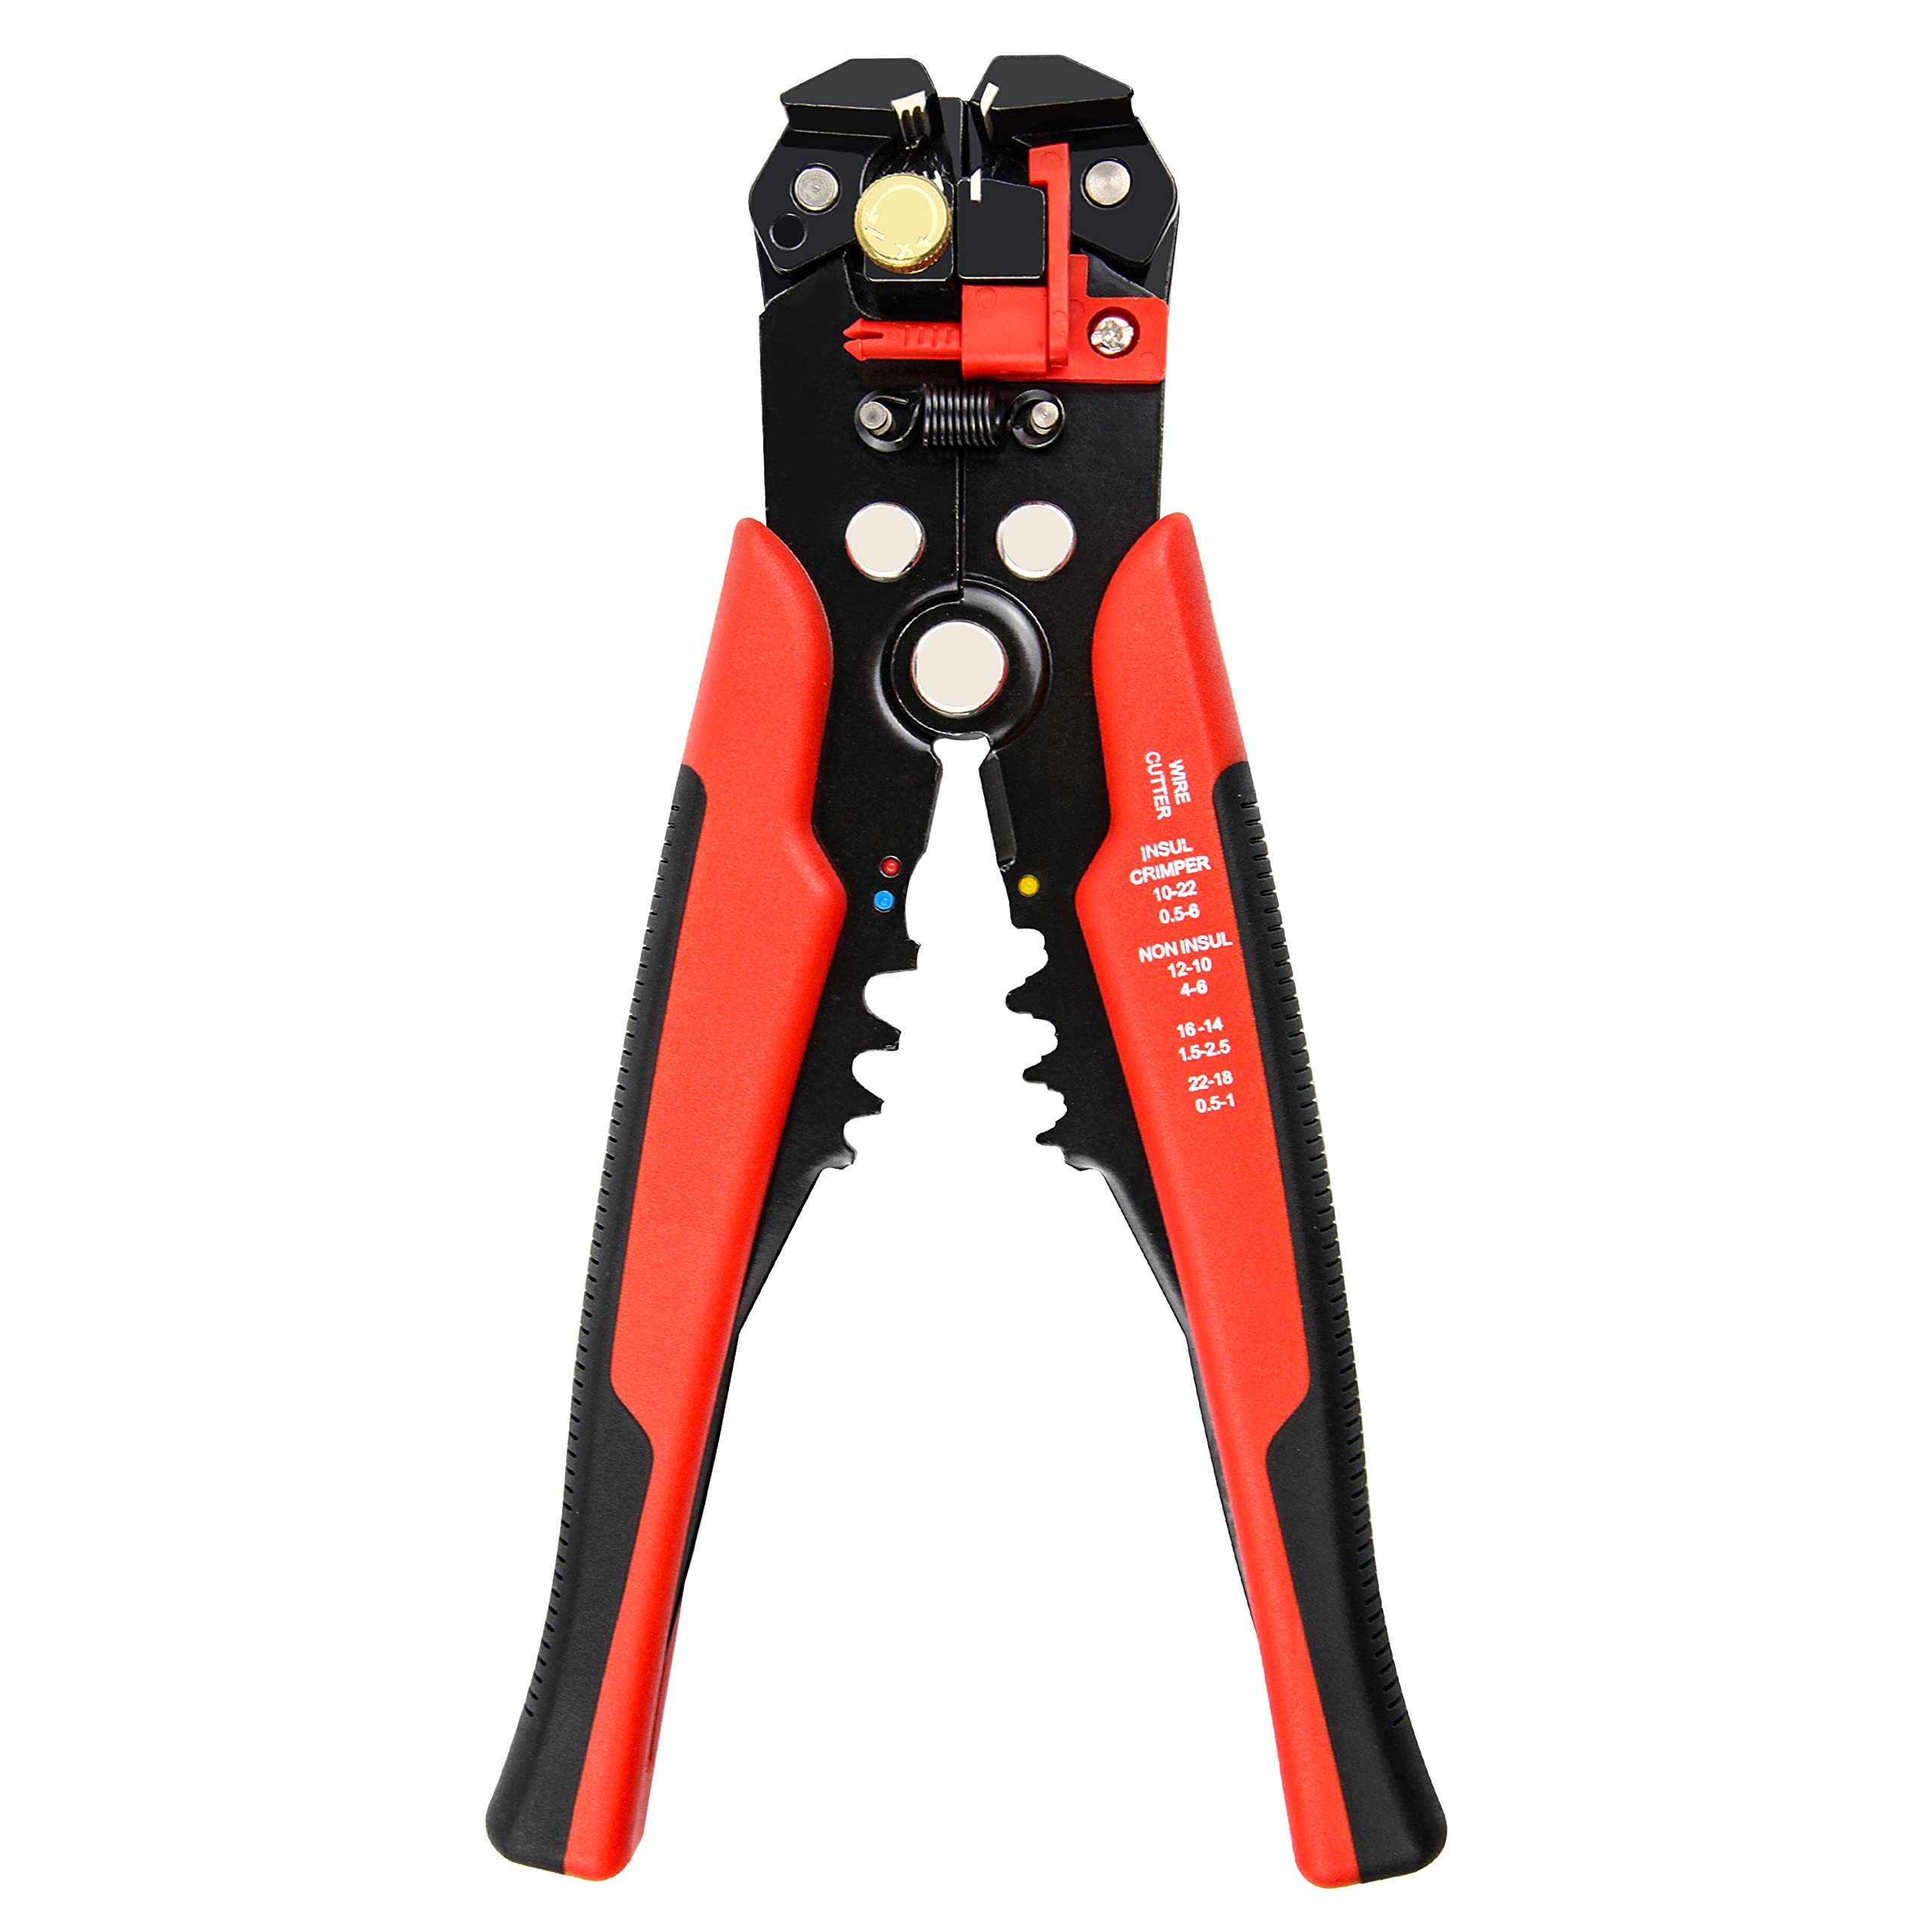 8" YIYITOOLS Wire Stripping Tool $6.46 + Free Shipping w/ Prime or on $35+